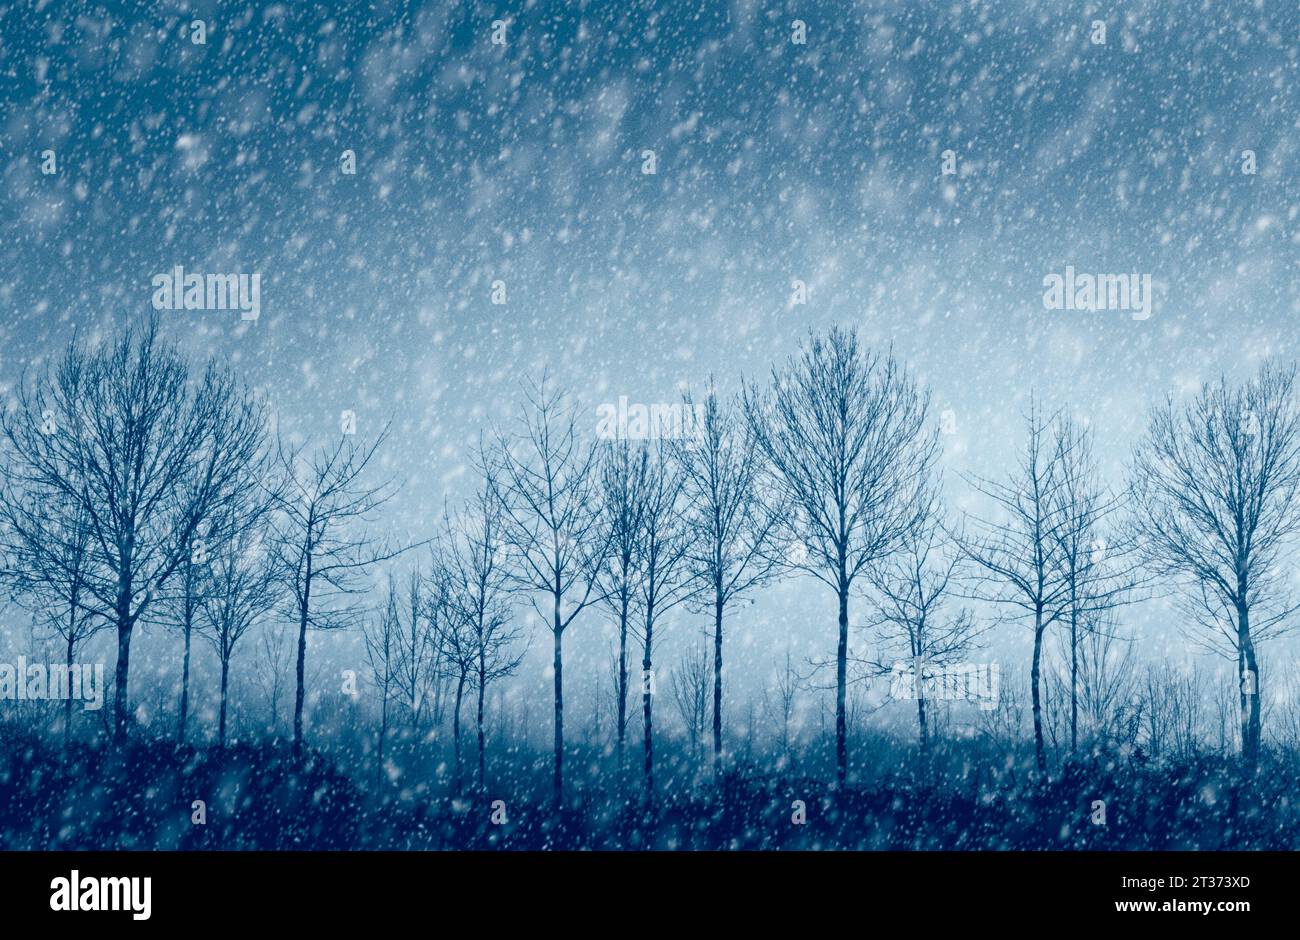 tree silhouette and winter snowstorm. Winter concept. Stock Photo